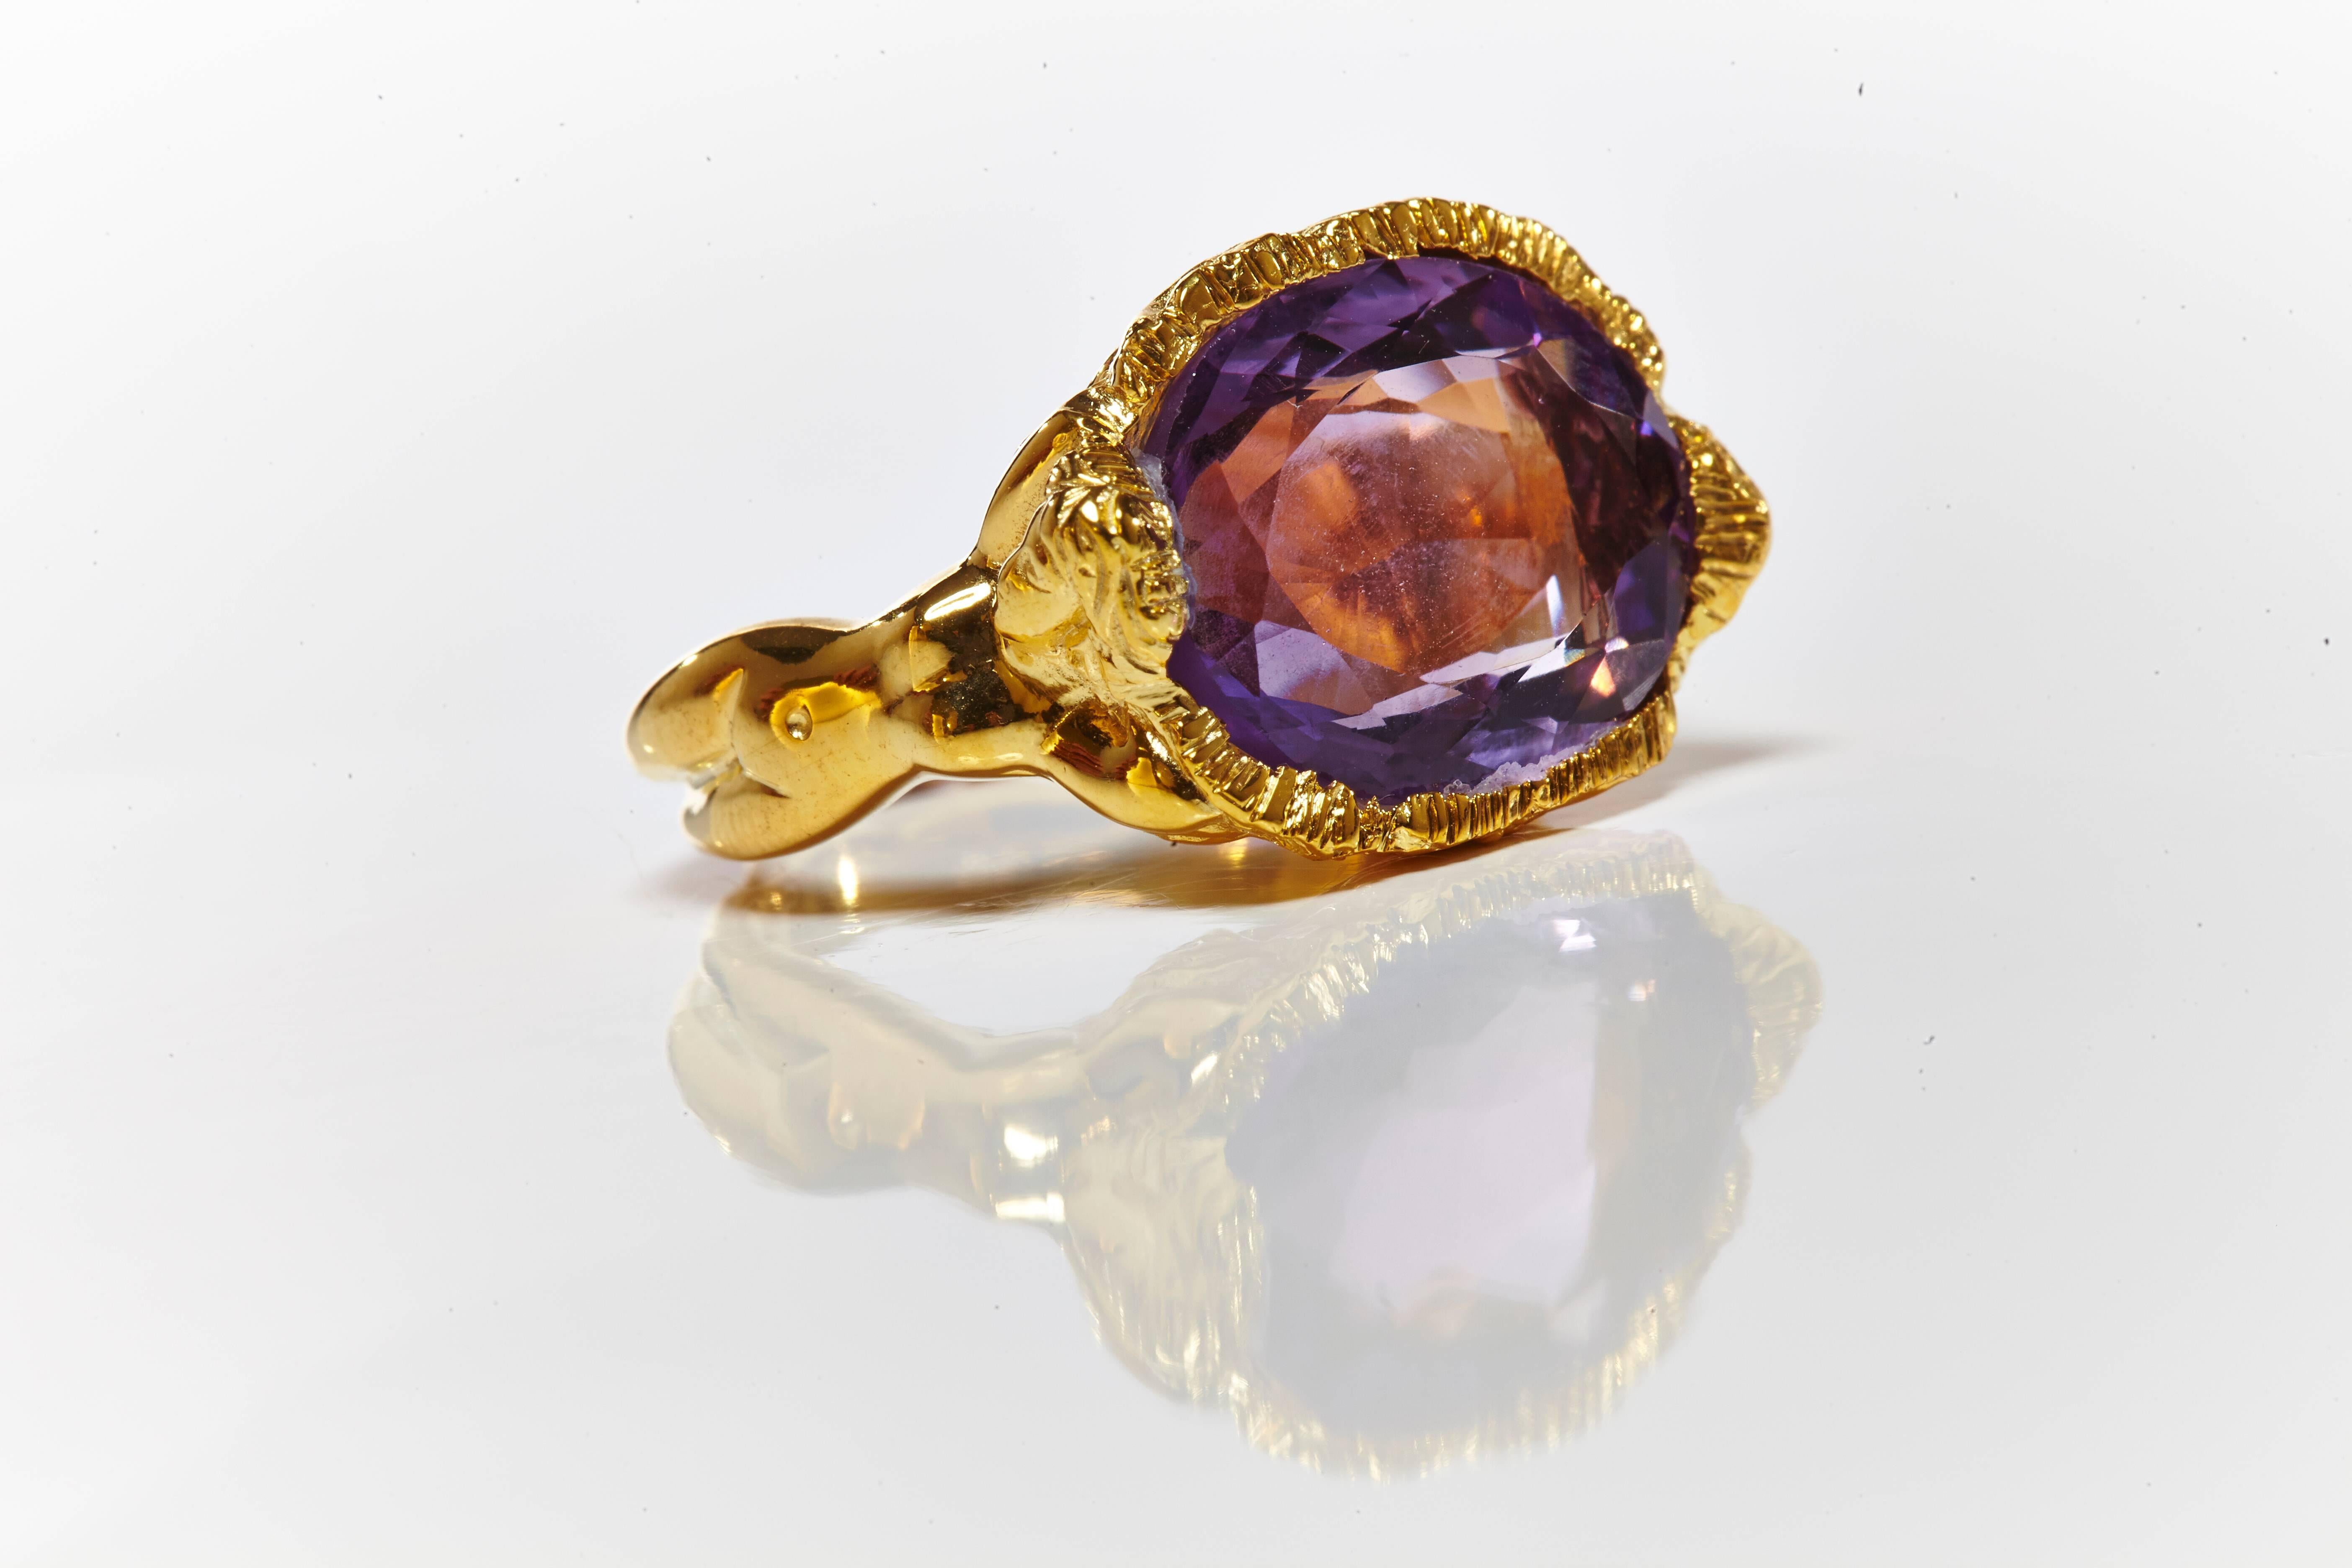 A ring featuring amethyst from the Maiden collection. 
Silver with gold vermeil.
Handmade in Jaipur, India.
Available in US size 8.